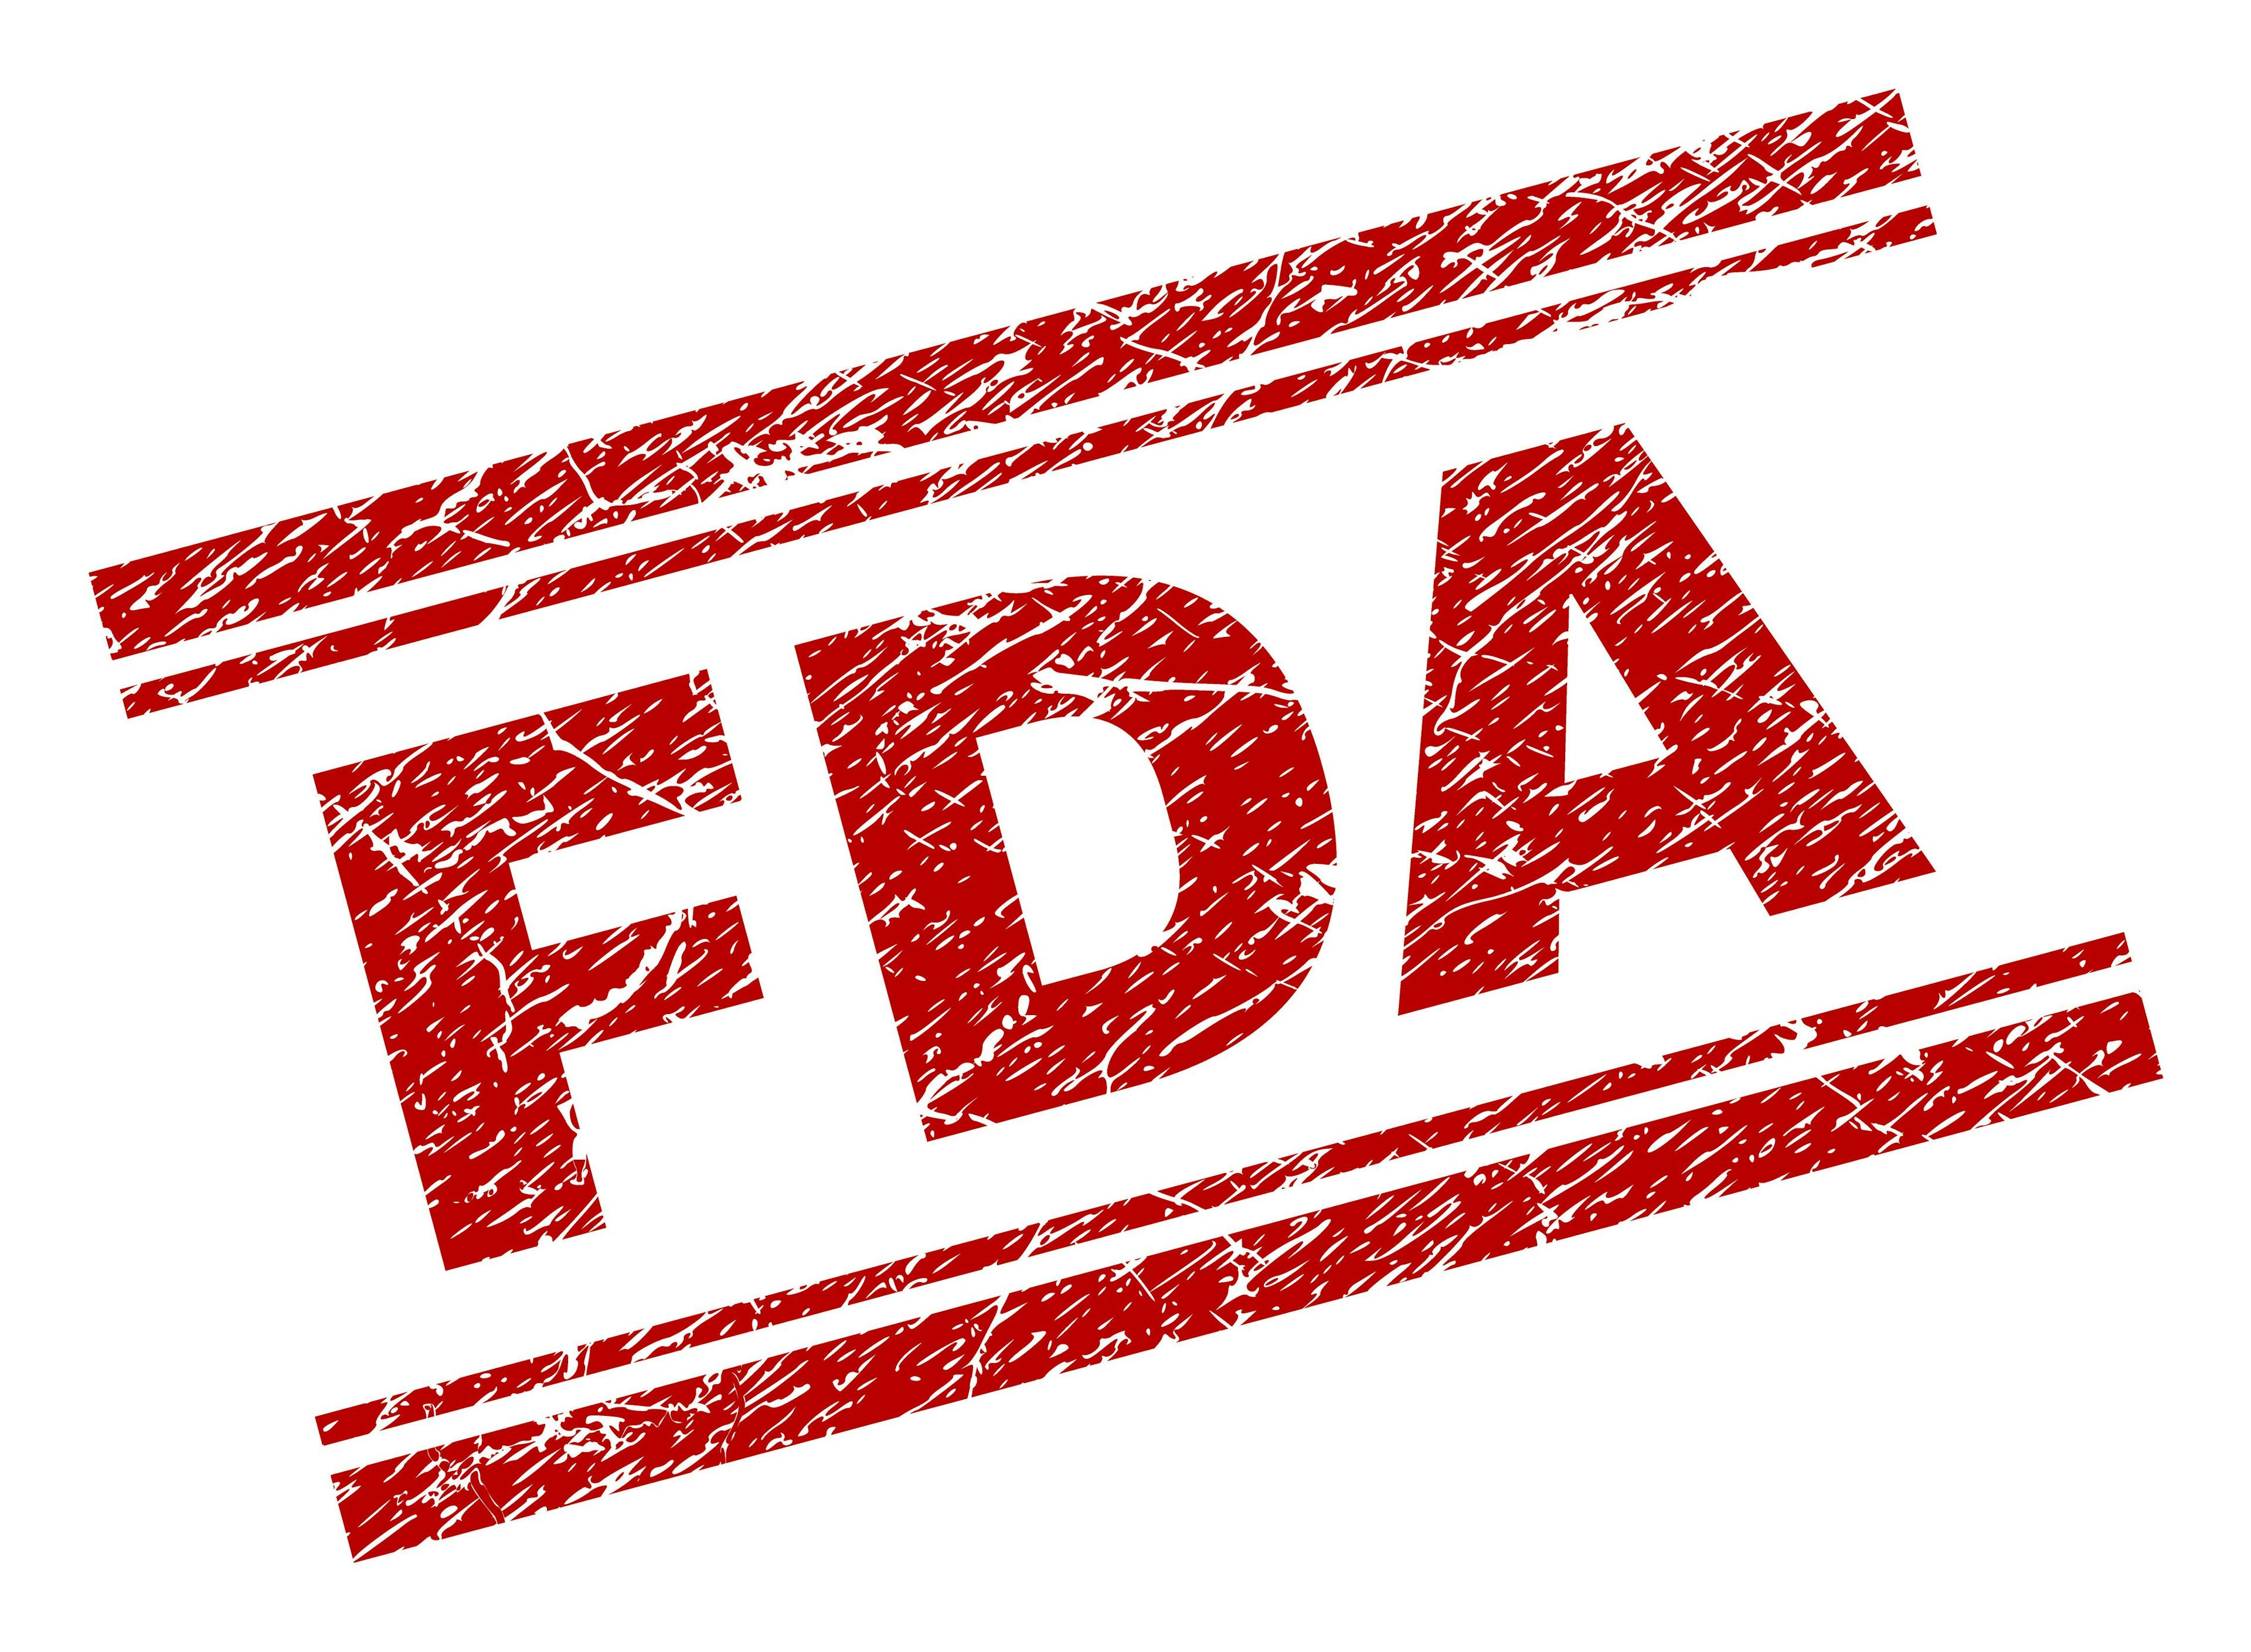 Timber Pharmaceuticals Meets with FDA on TMB-001 End-of-Phase 2 Trial